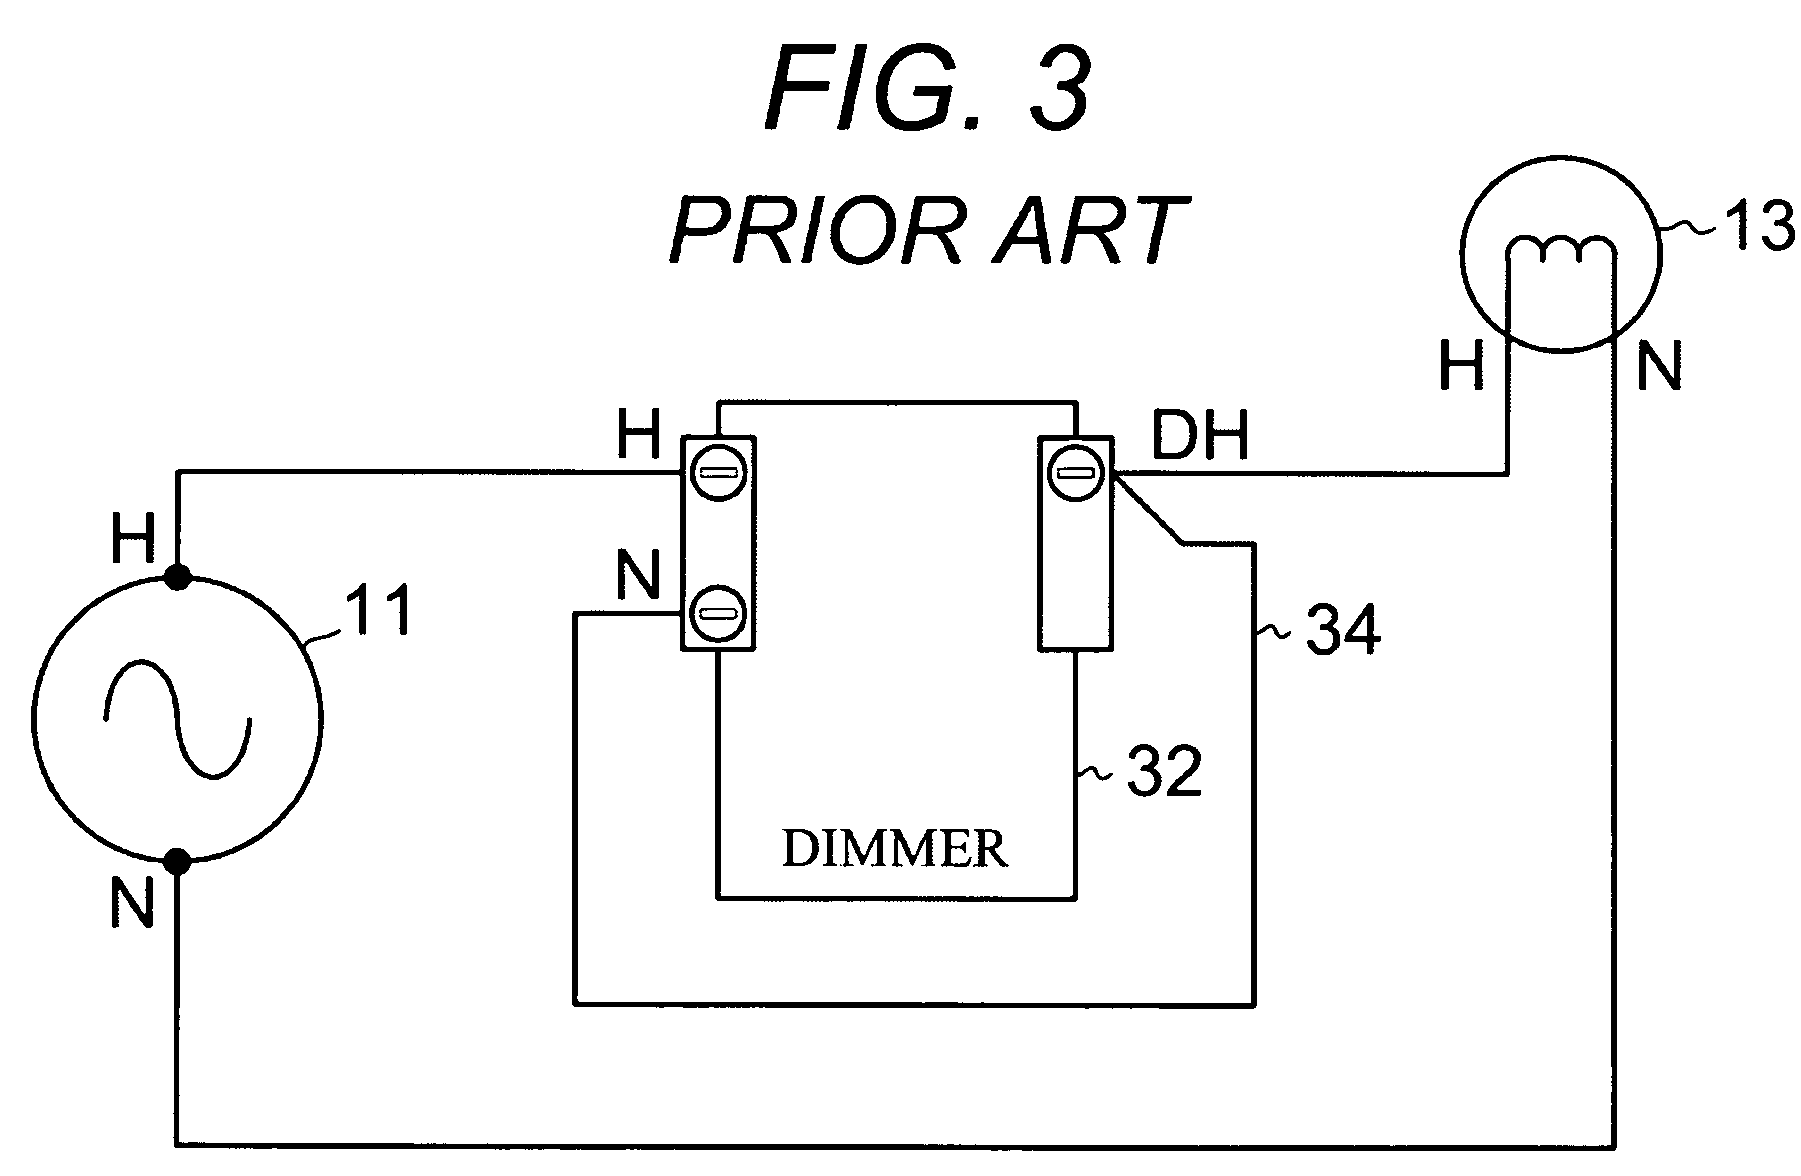 Dimmer adaptable to either two or three active wires